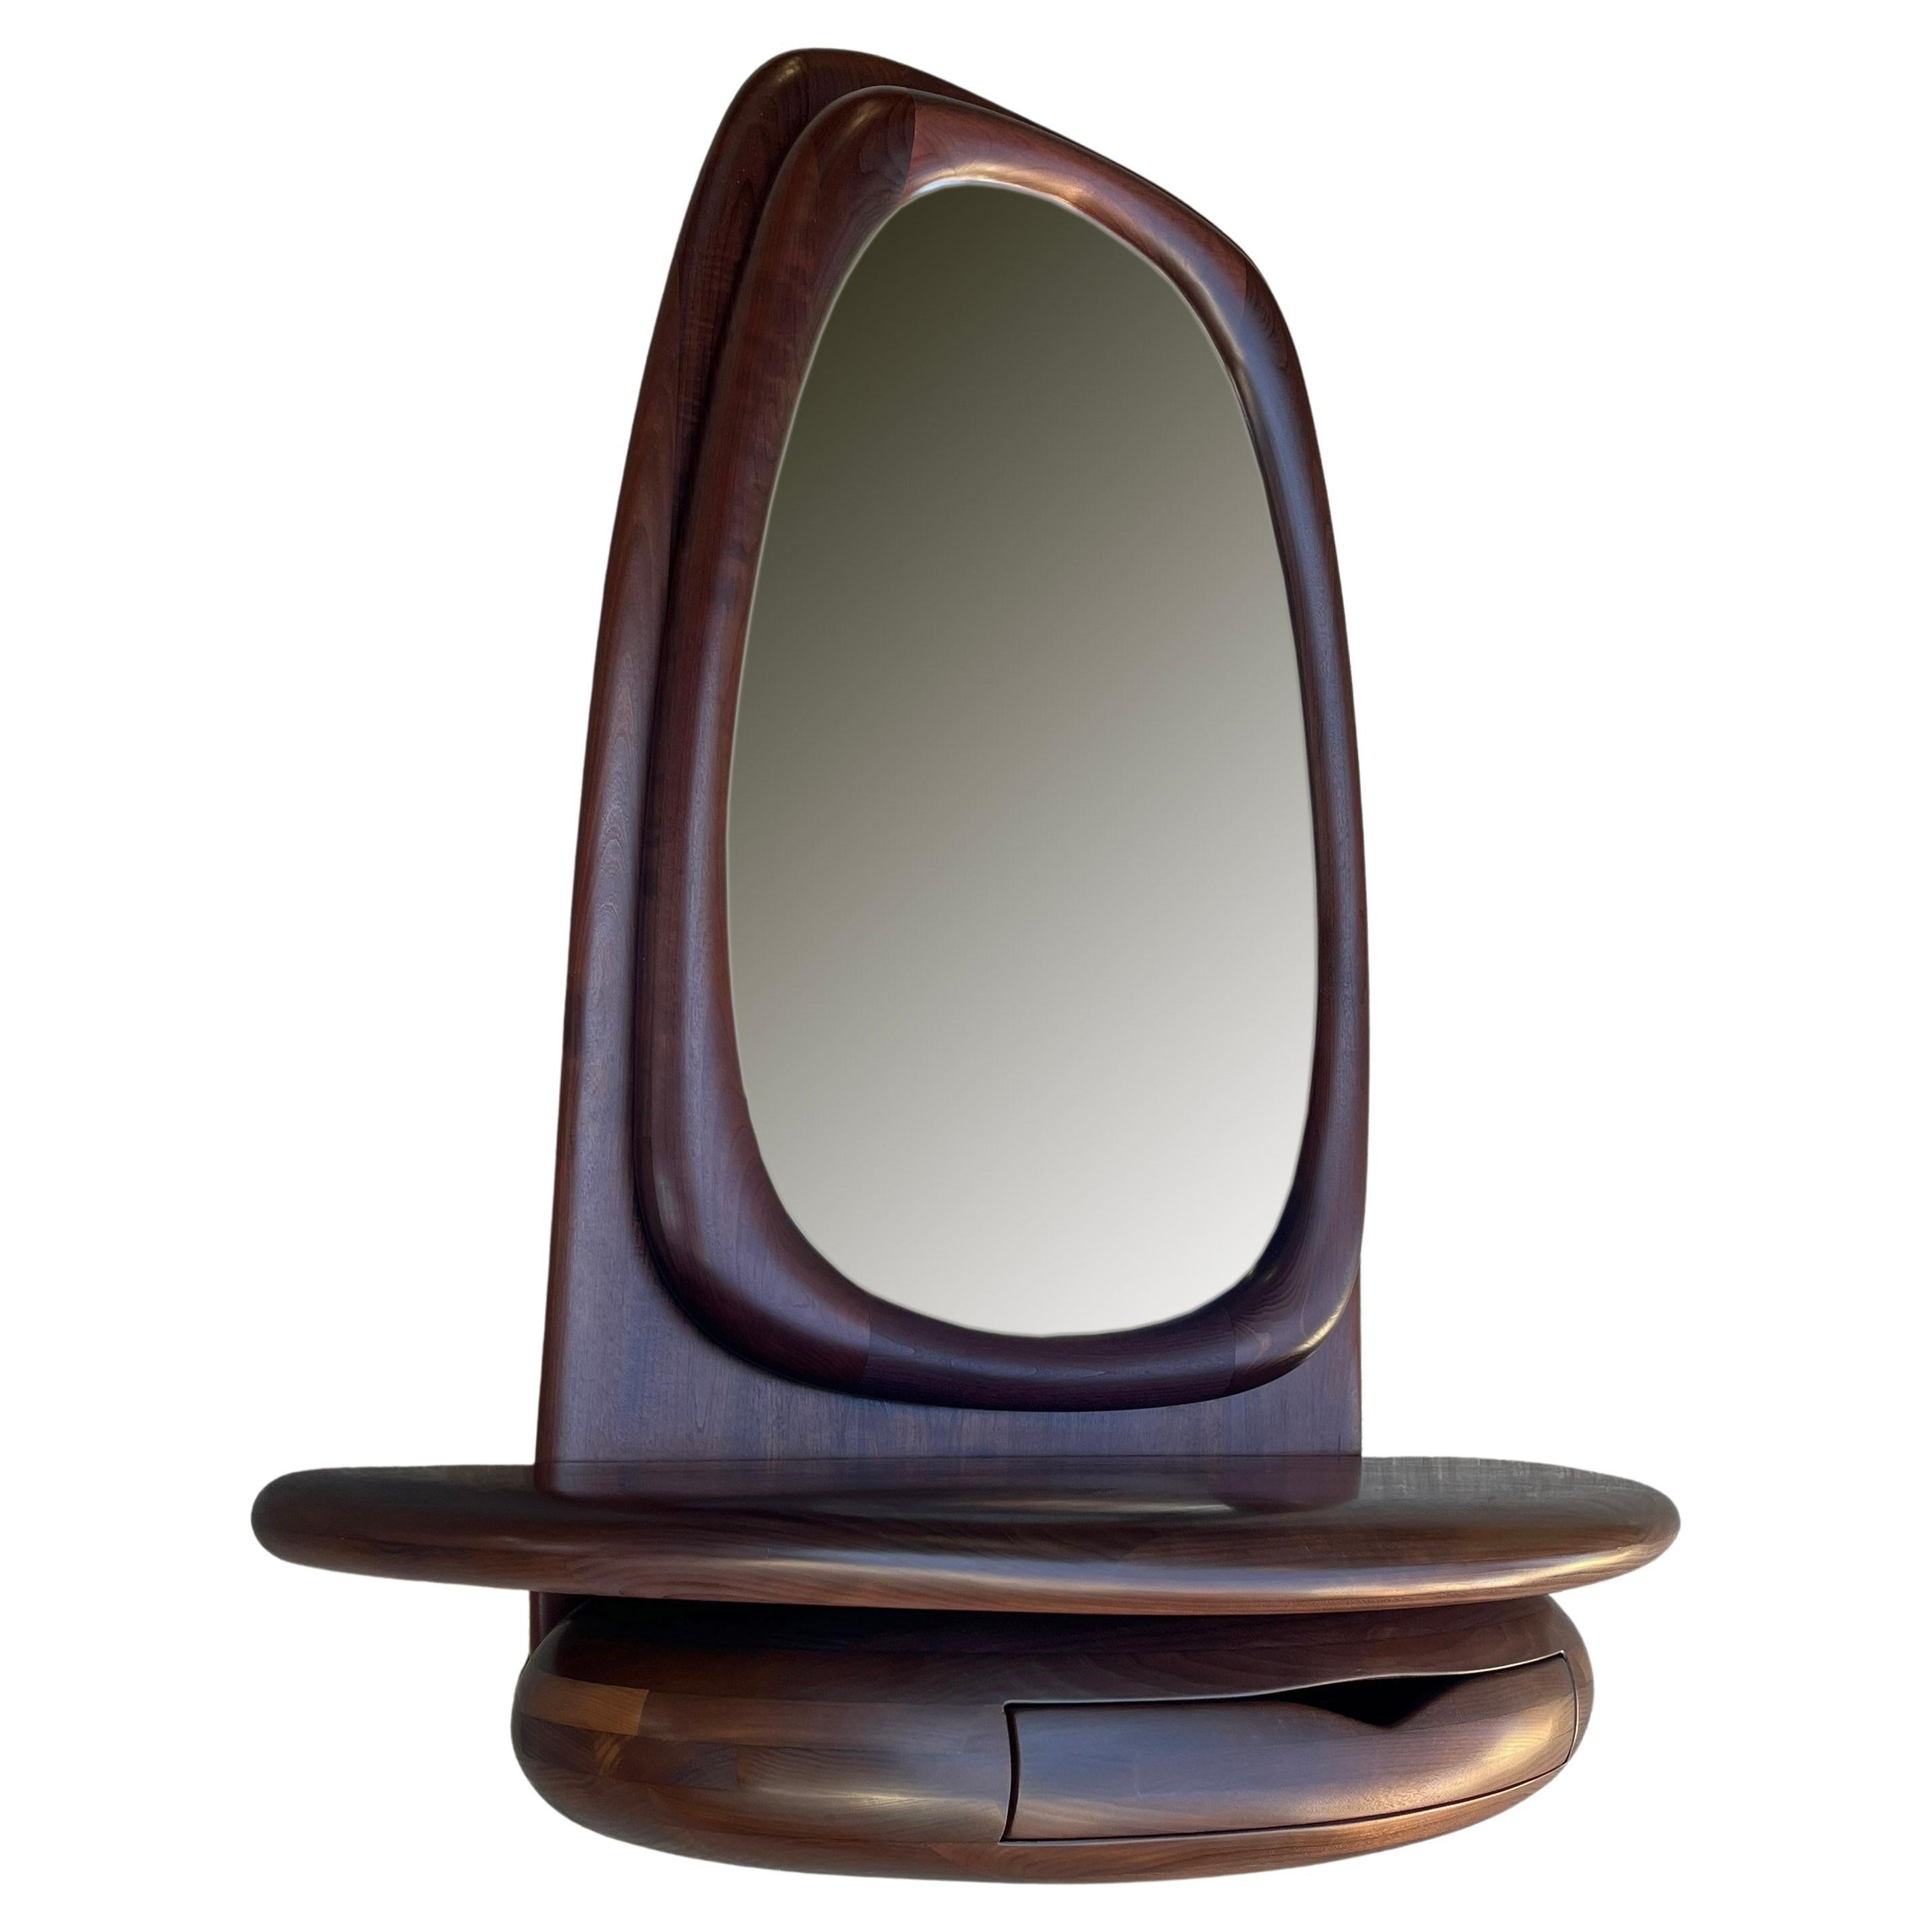 For your consideration is this beautifully sculpted mirror by Dean Santner. Master Craftsman Dean Santner designs are part of the American Modern Craft movement alongside Wendell Castle, Nakashima, Phillip Powell and was part of the Bolinas Craft